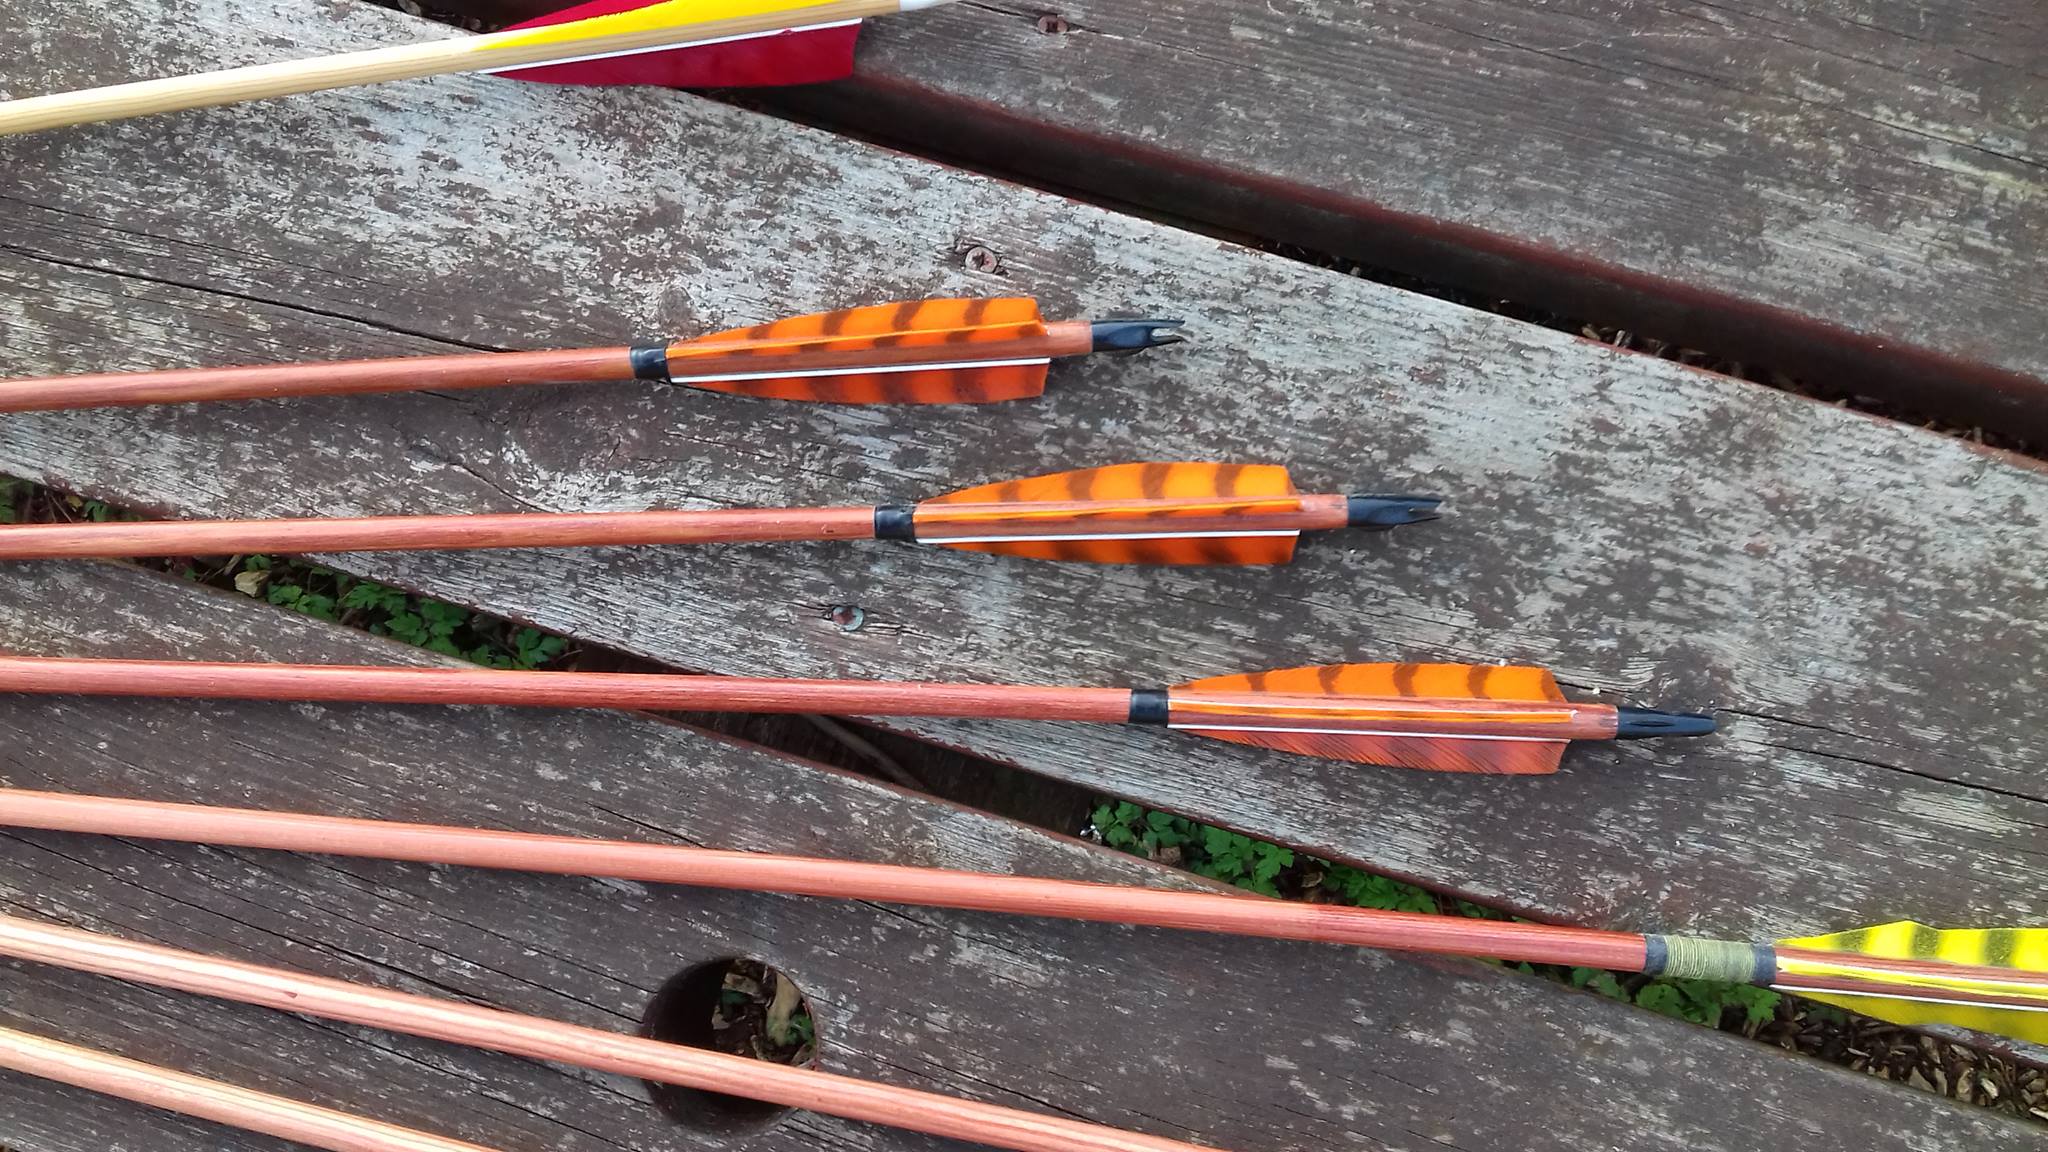 Arrows - Medieval Warbows and Longbows